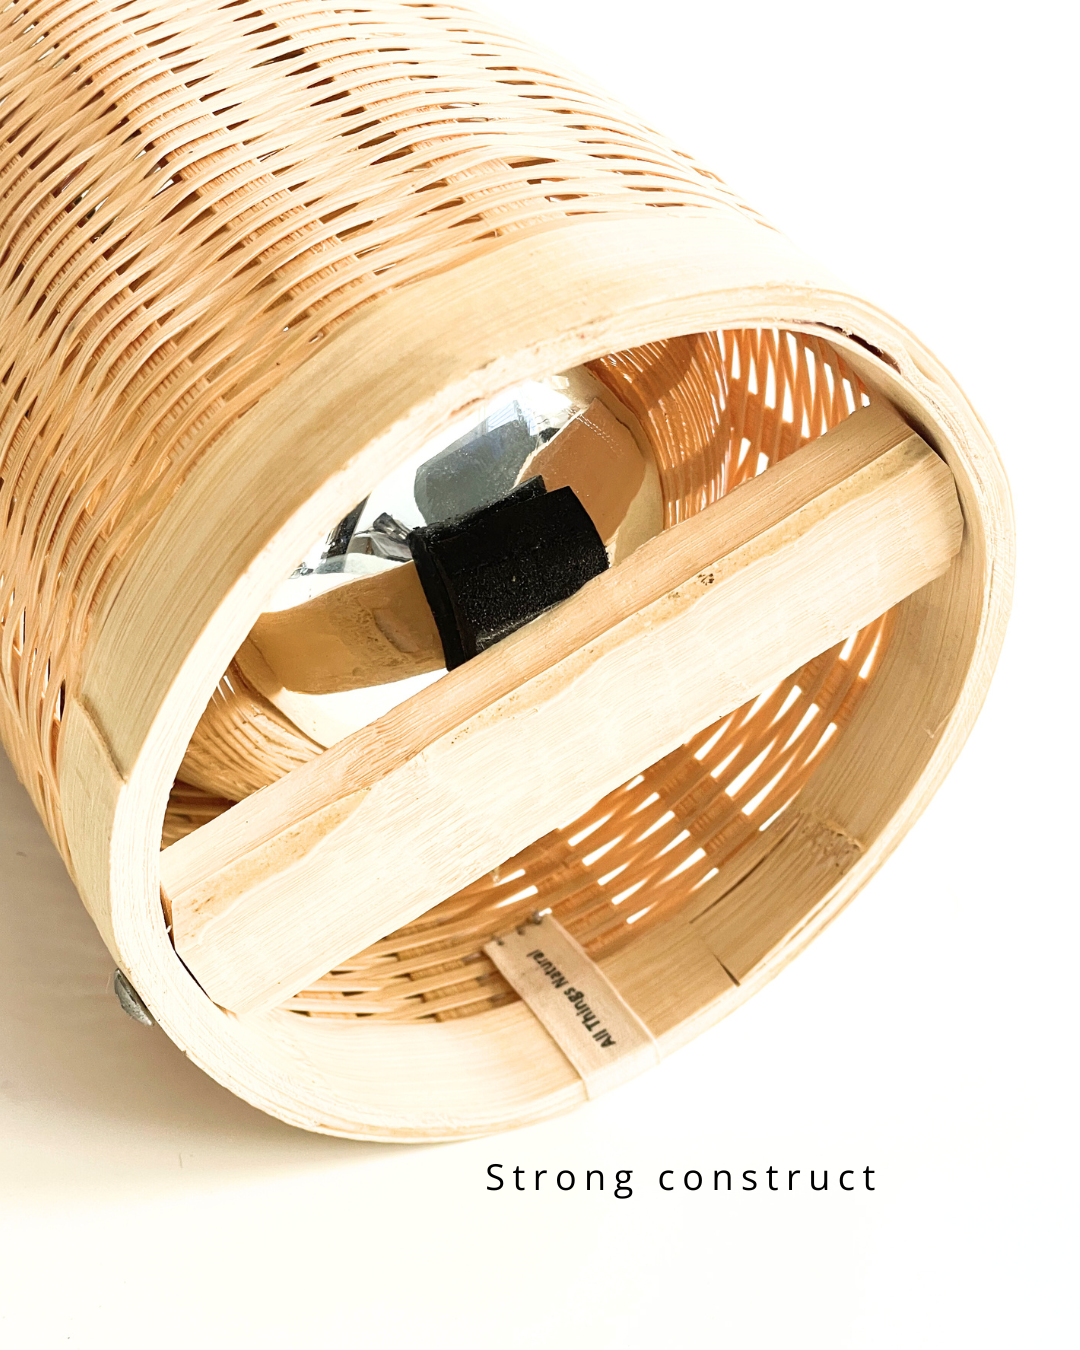 Bottom view of Bamboo flask showing Strong construct